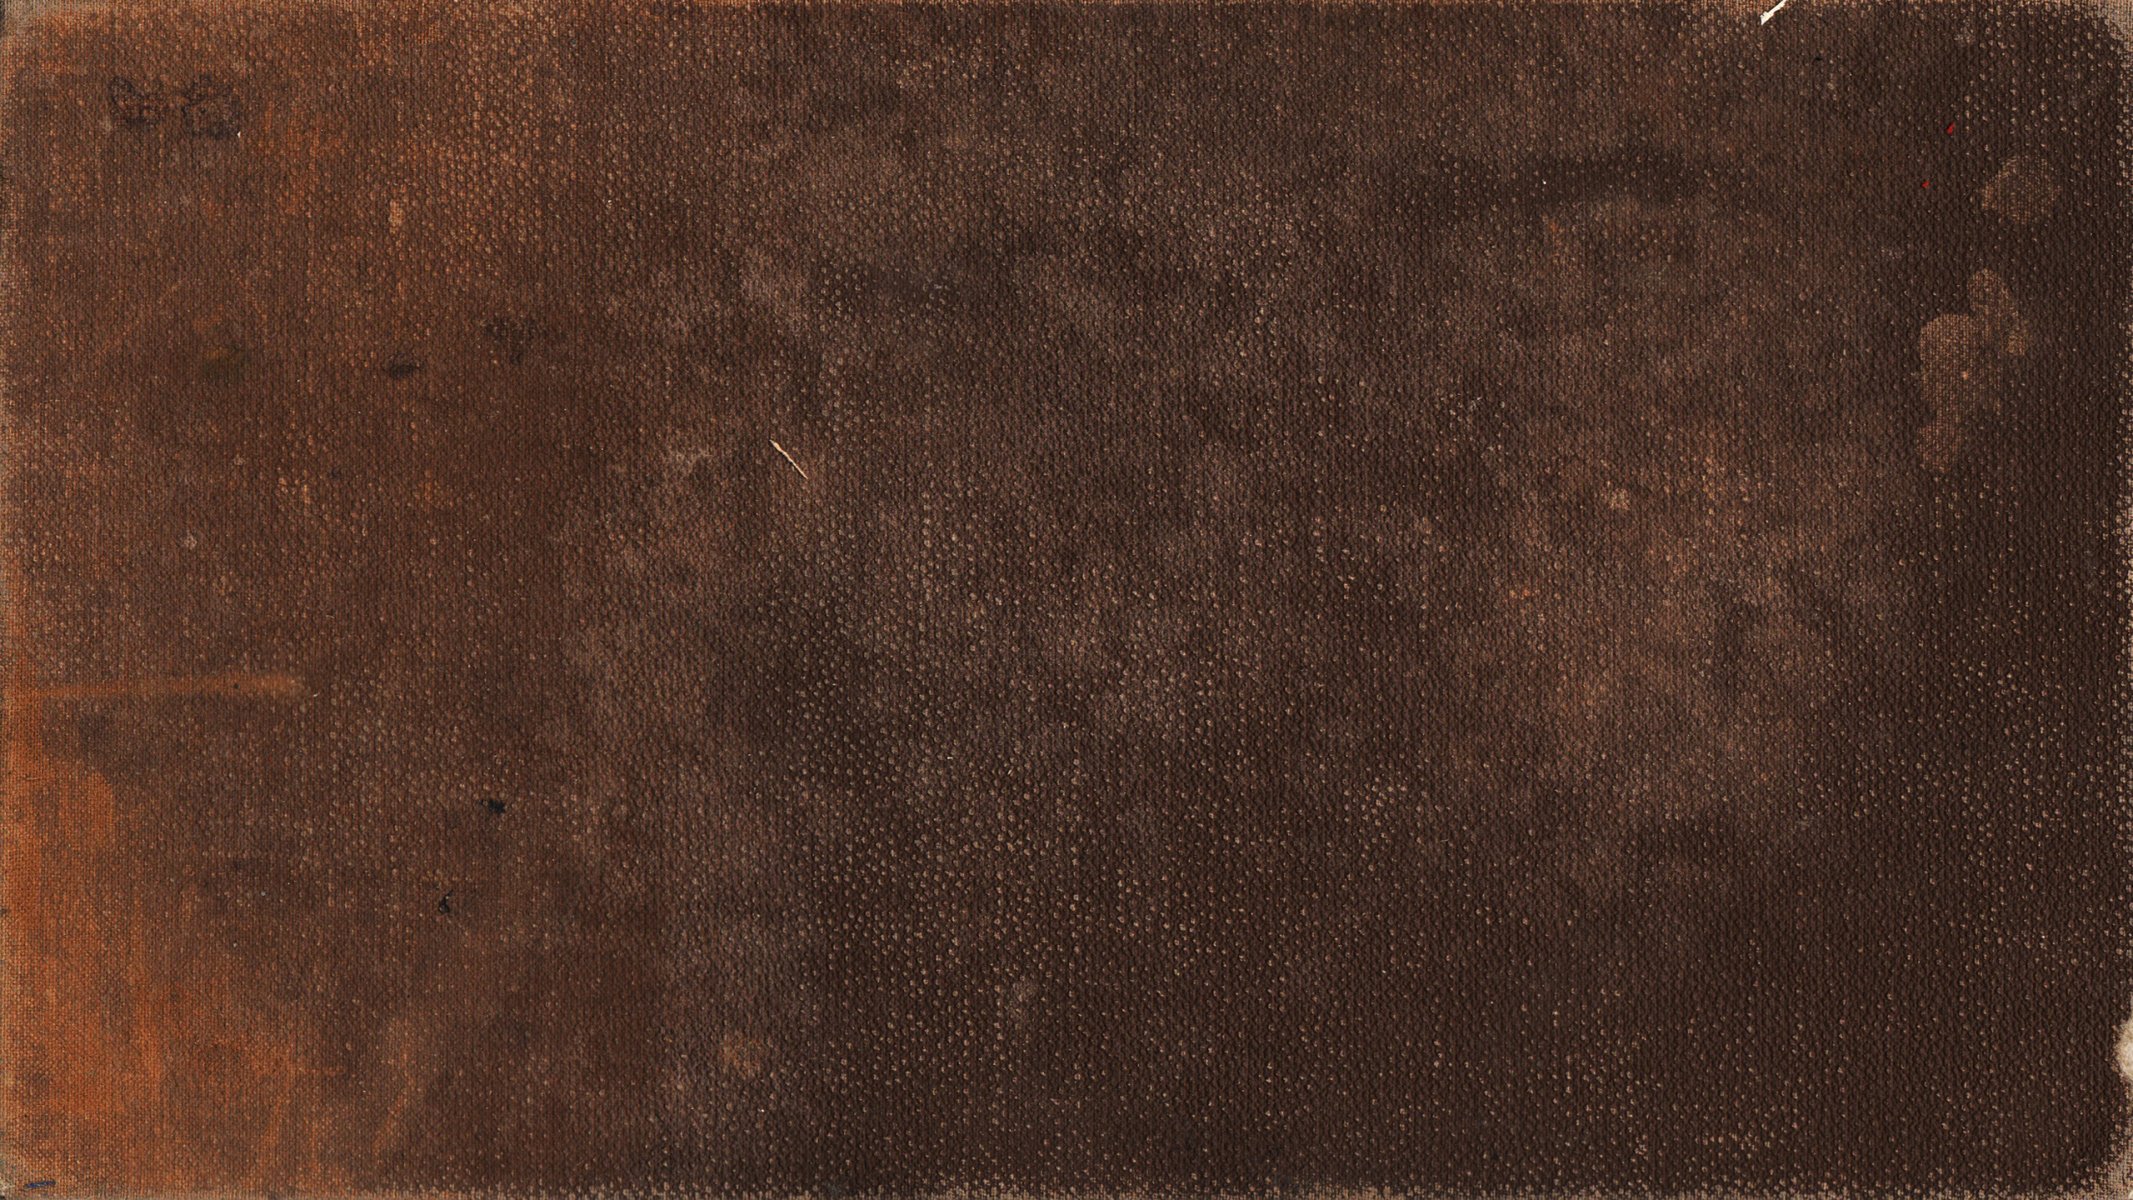 book cover wallpaper,brown,wood,fur,leather